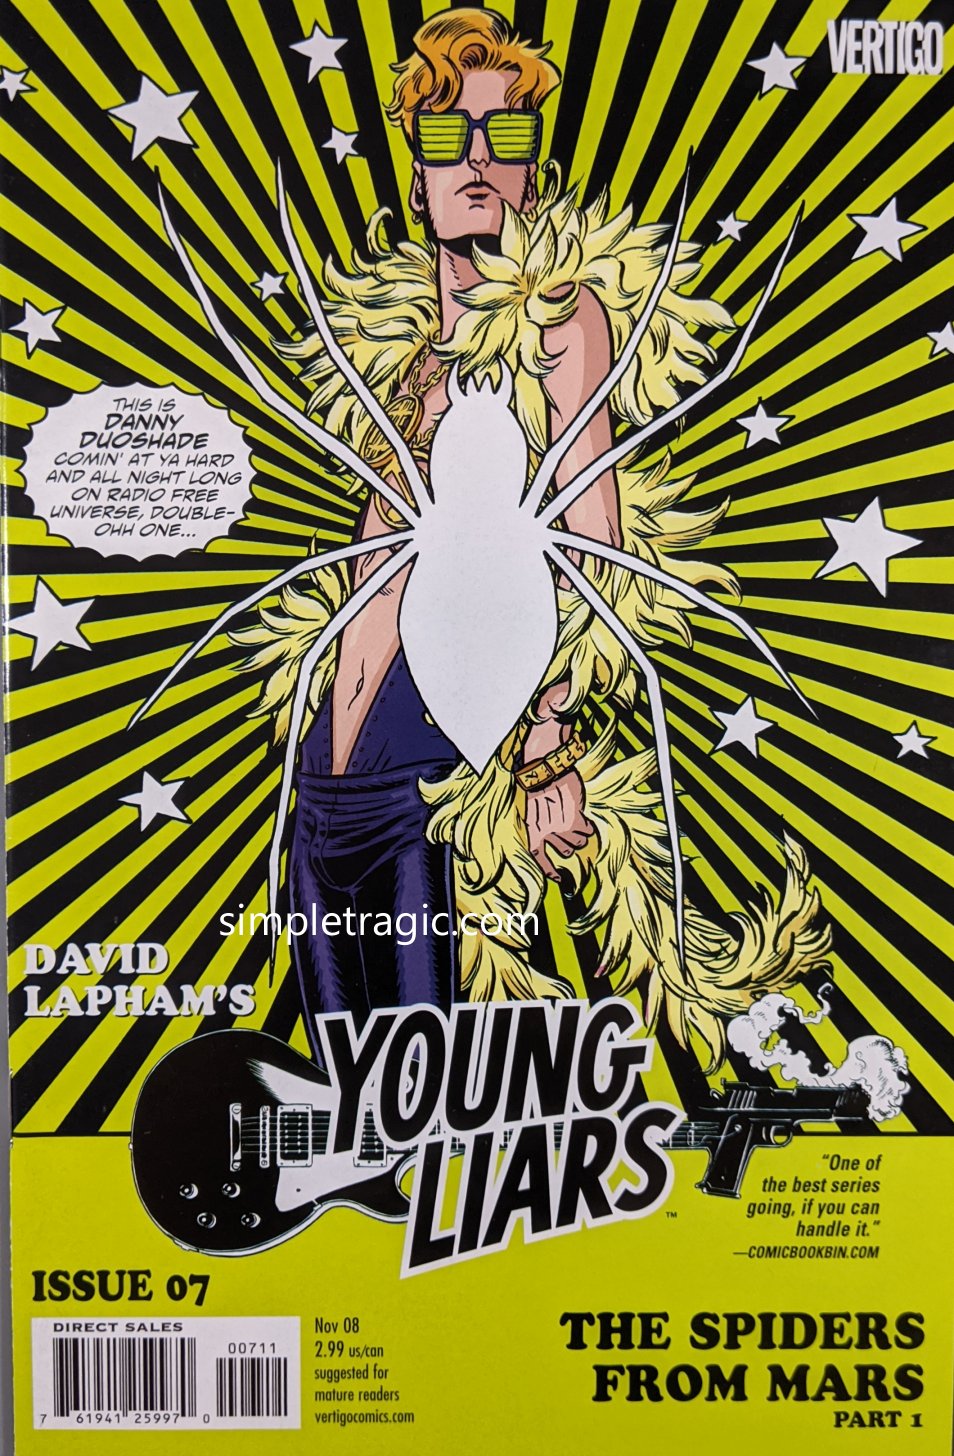 Young Liars (2008) #7